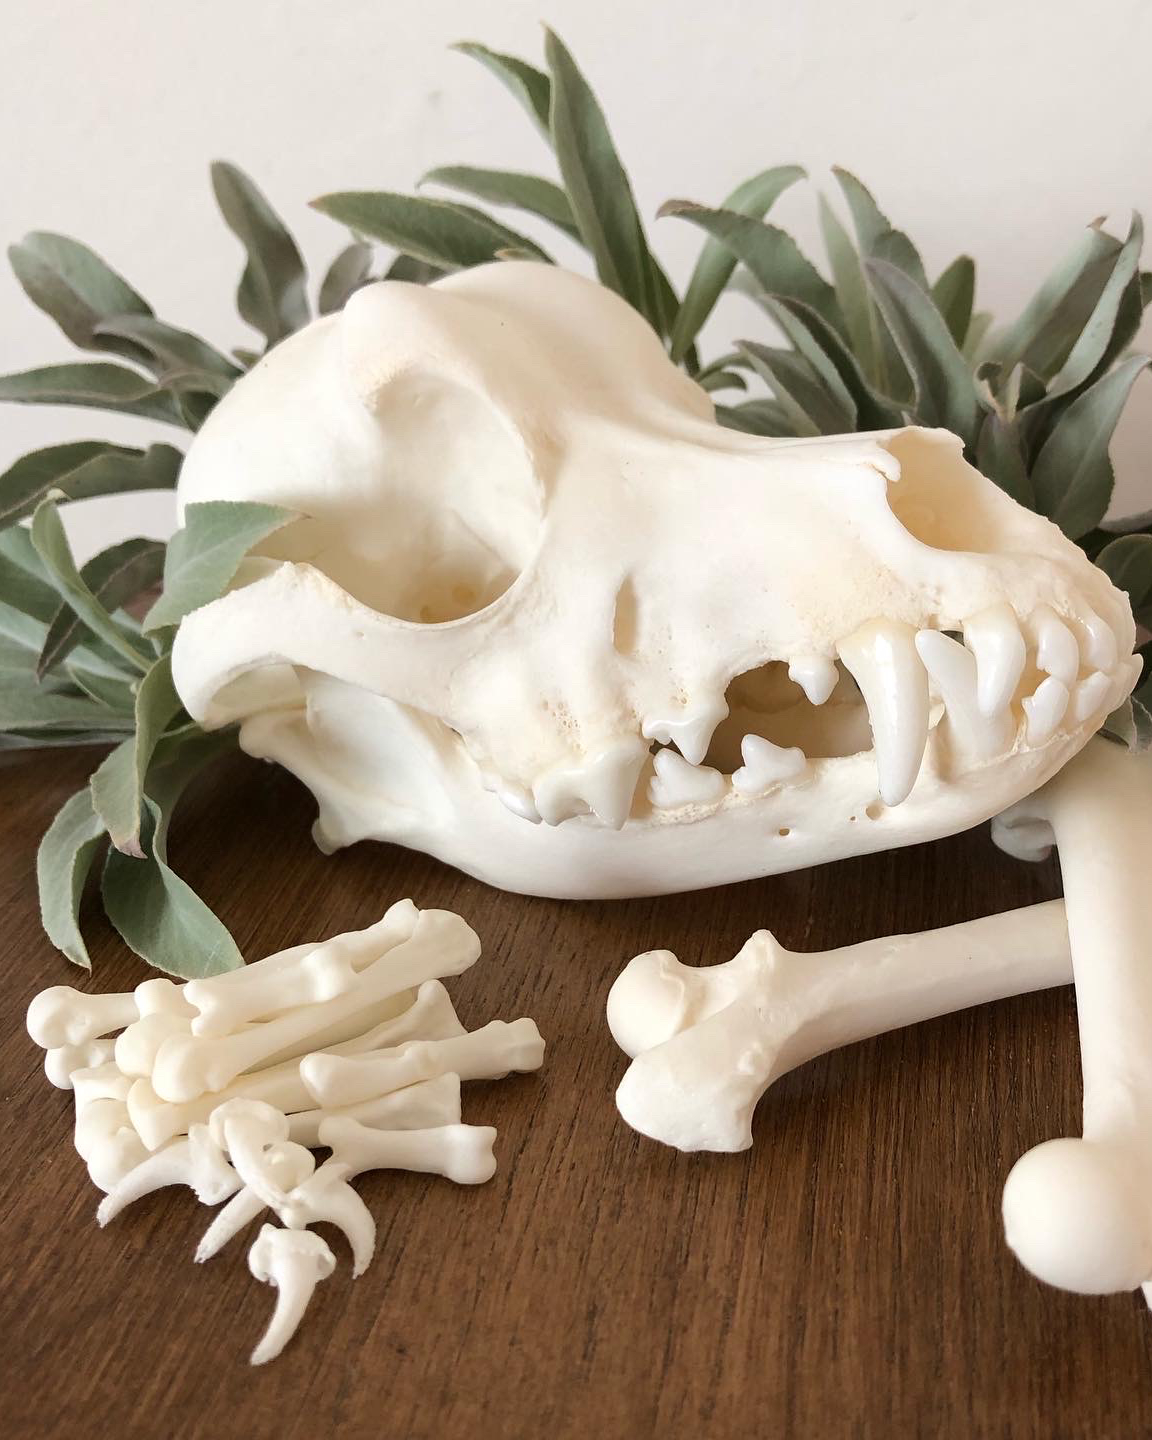 Dog skull with sage in the background, and other cleaned bones in the foreground